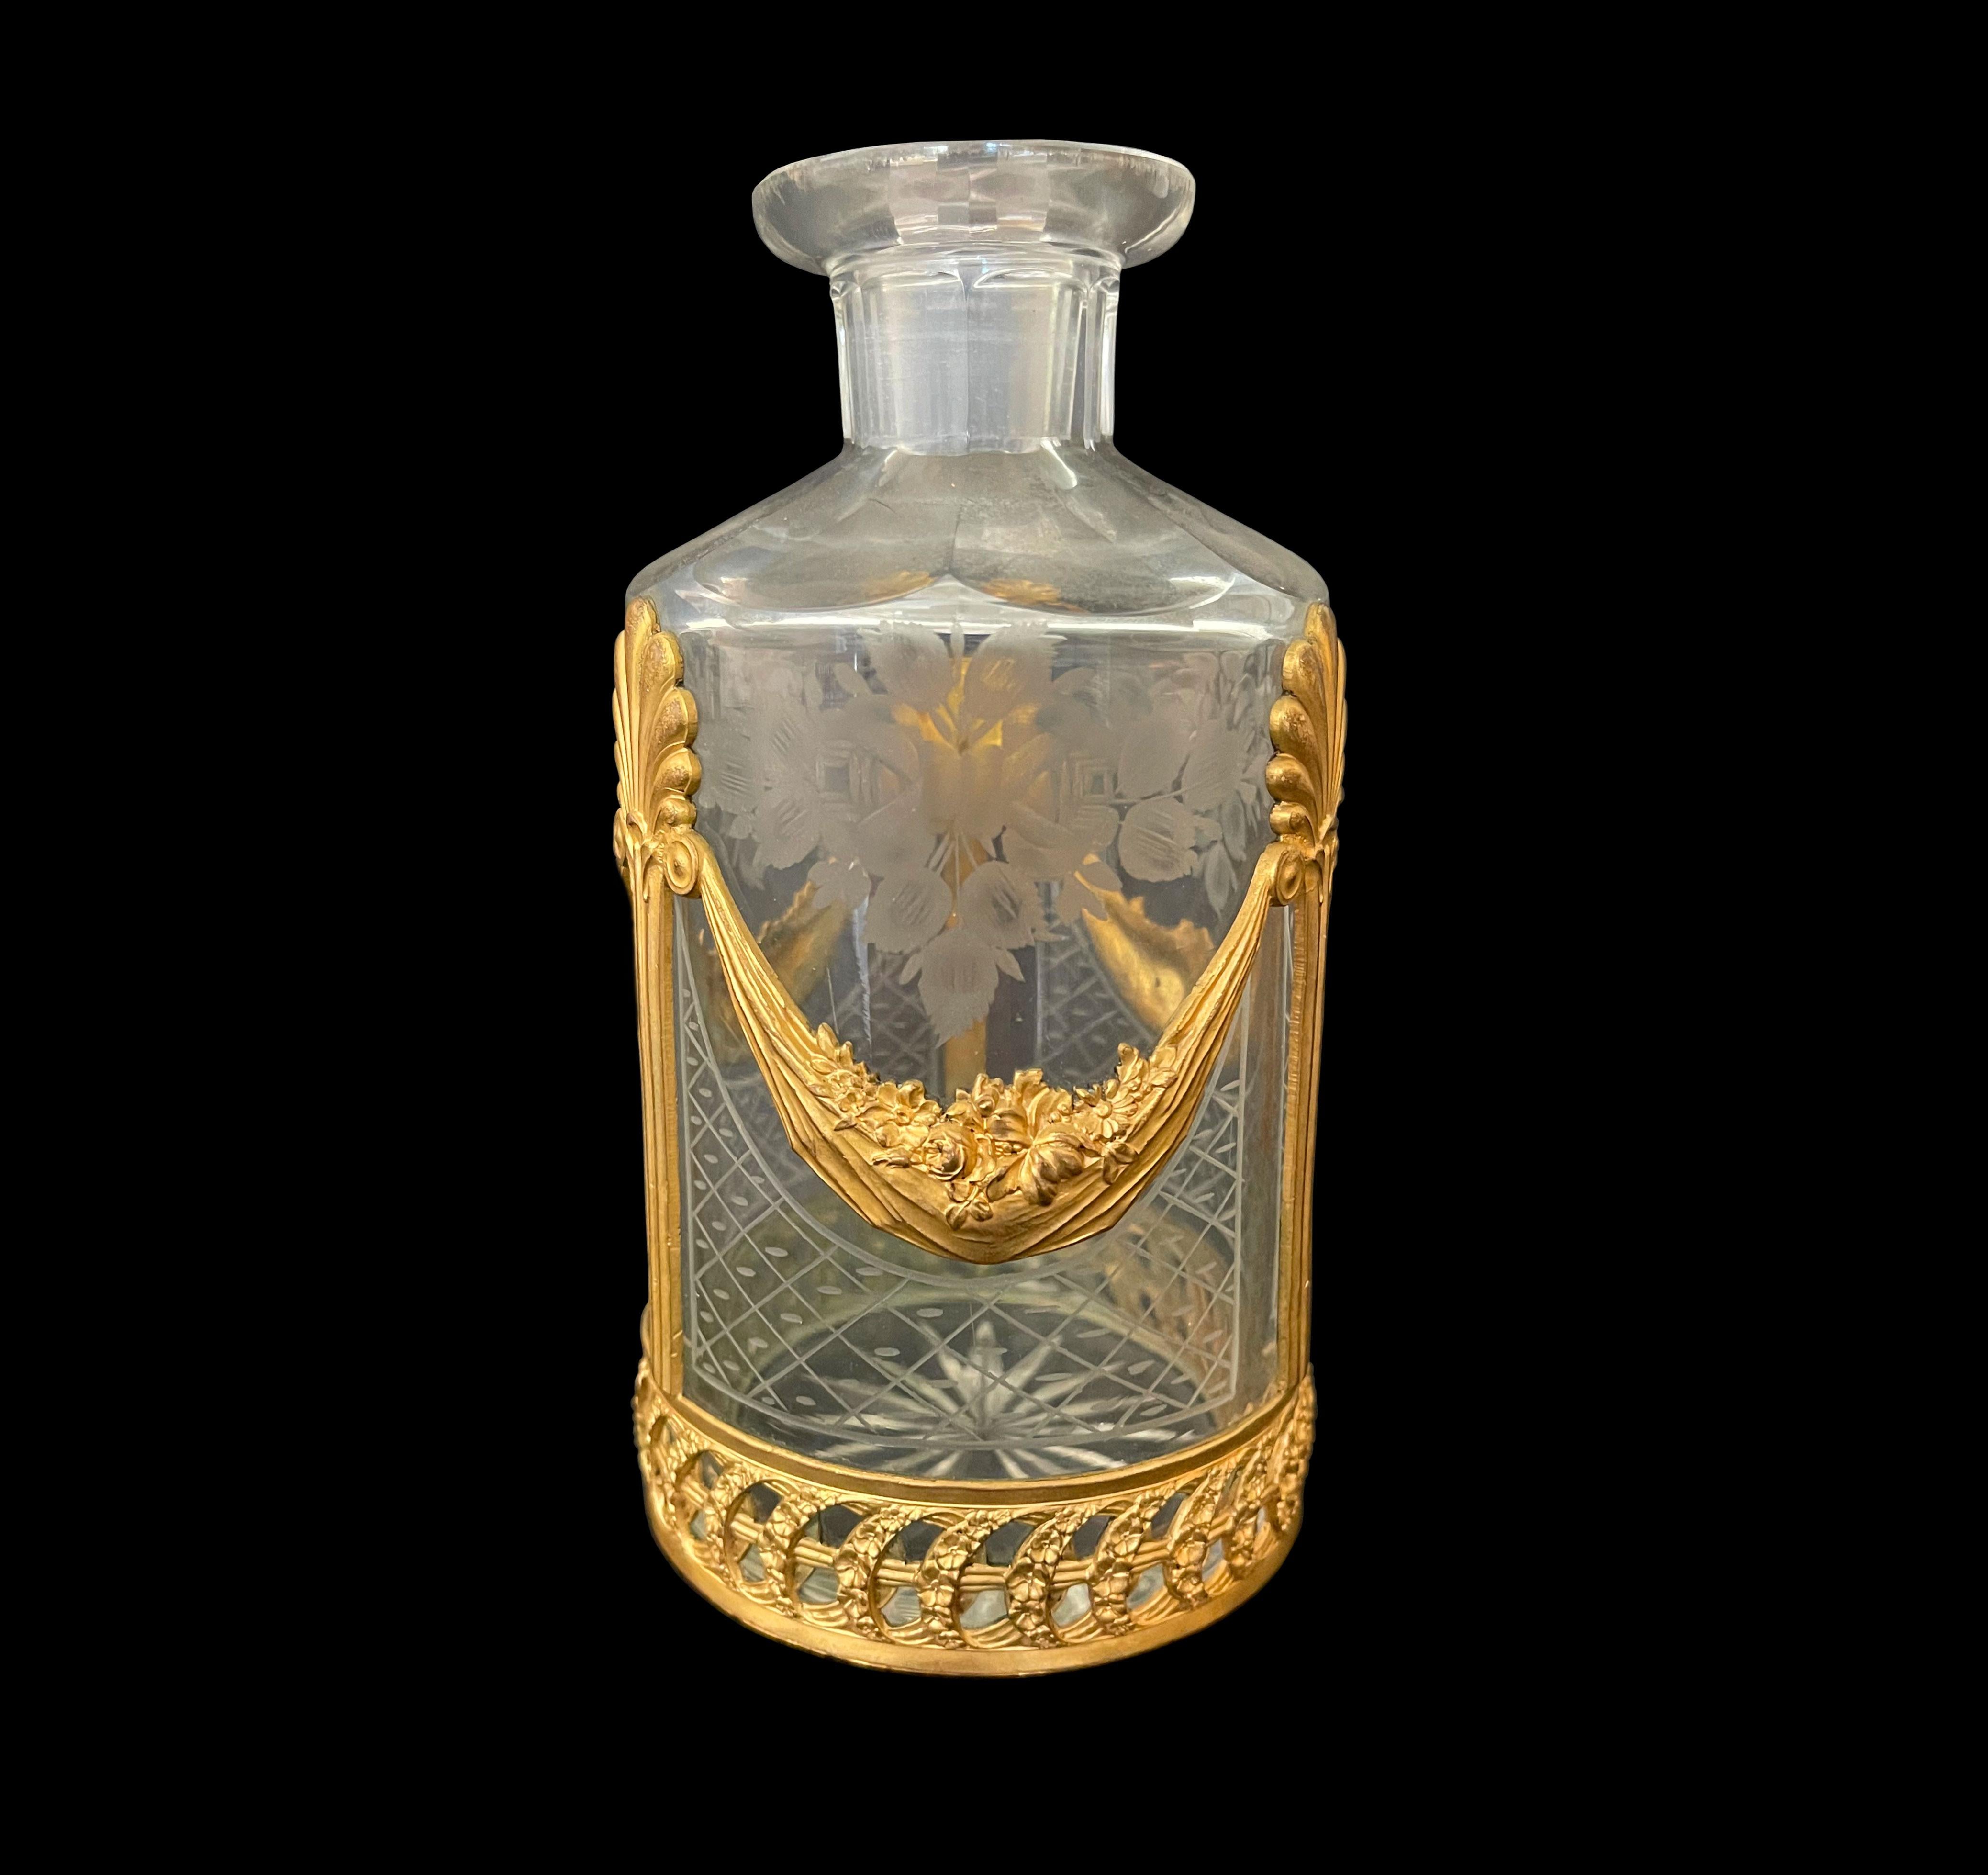 A fine quality 19th C. French Baccarat engraved crystal mounted bronze perfume bottle.

H: 7-1/2”

D: 3”

Baccarat Crystal (pronounced [baka?a]) is a French manufacturer of fine crystal located in Baccarat, France. The company owns two